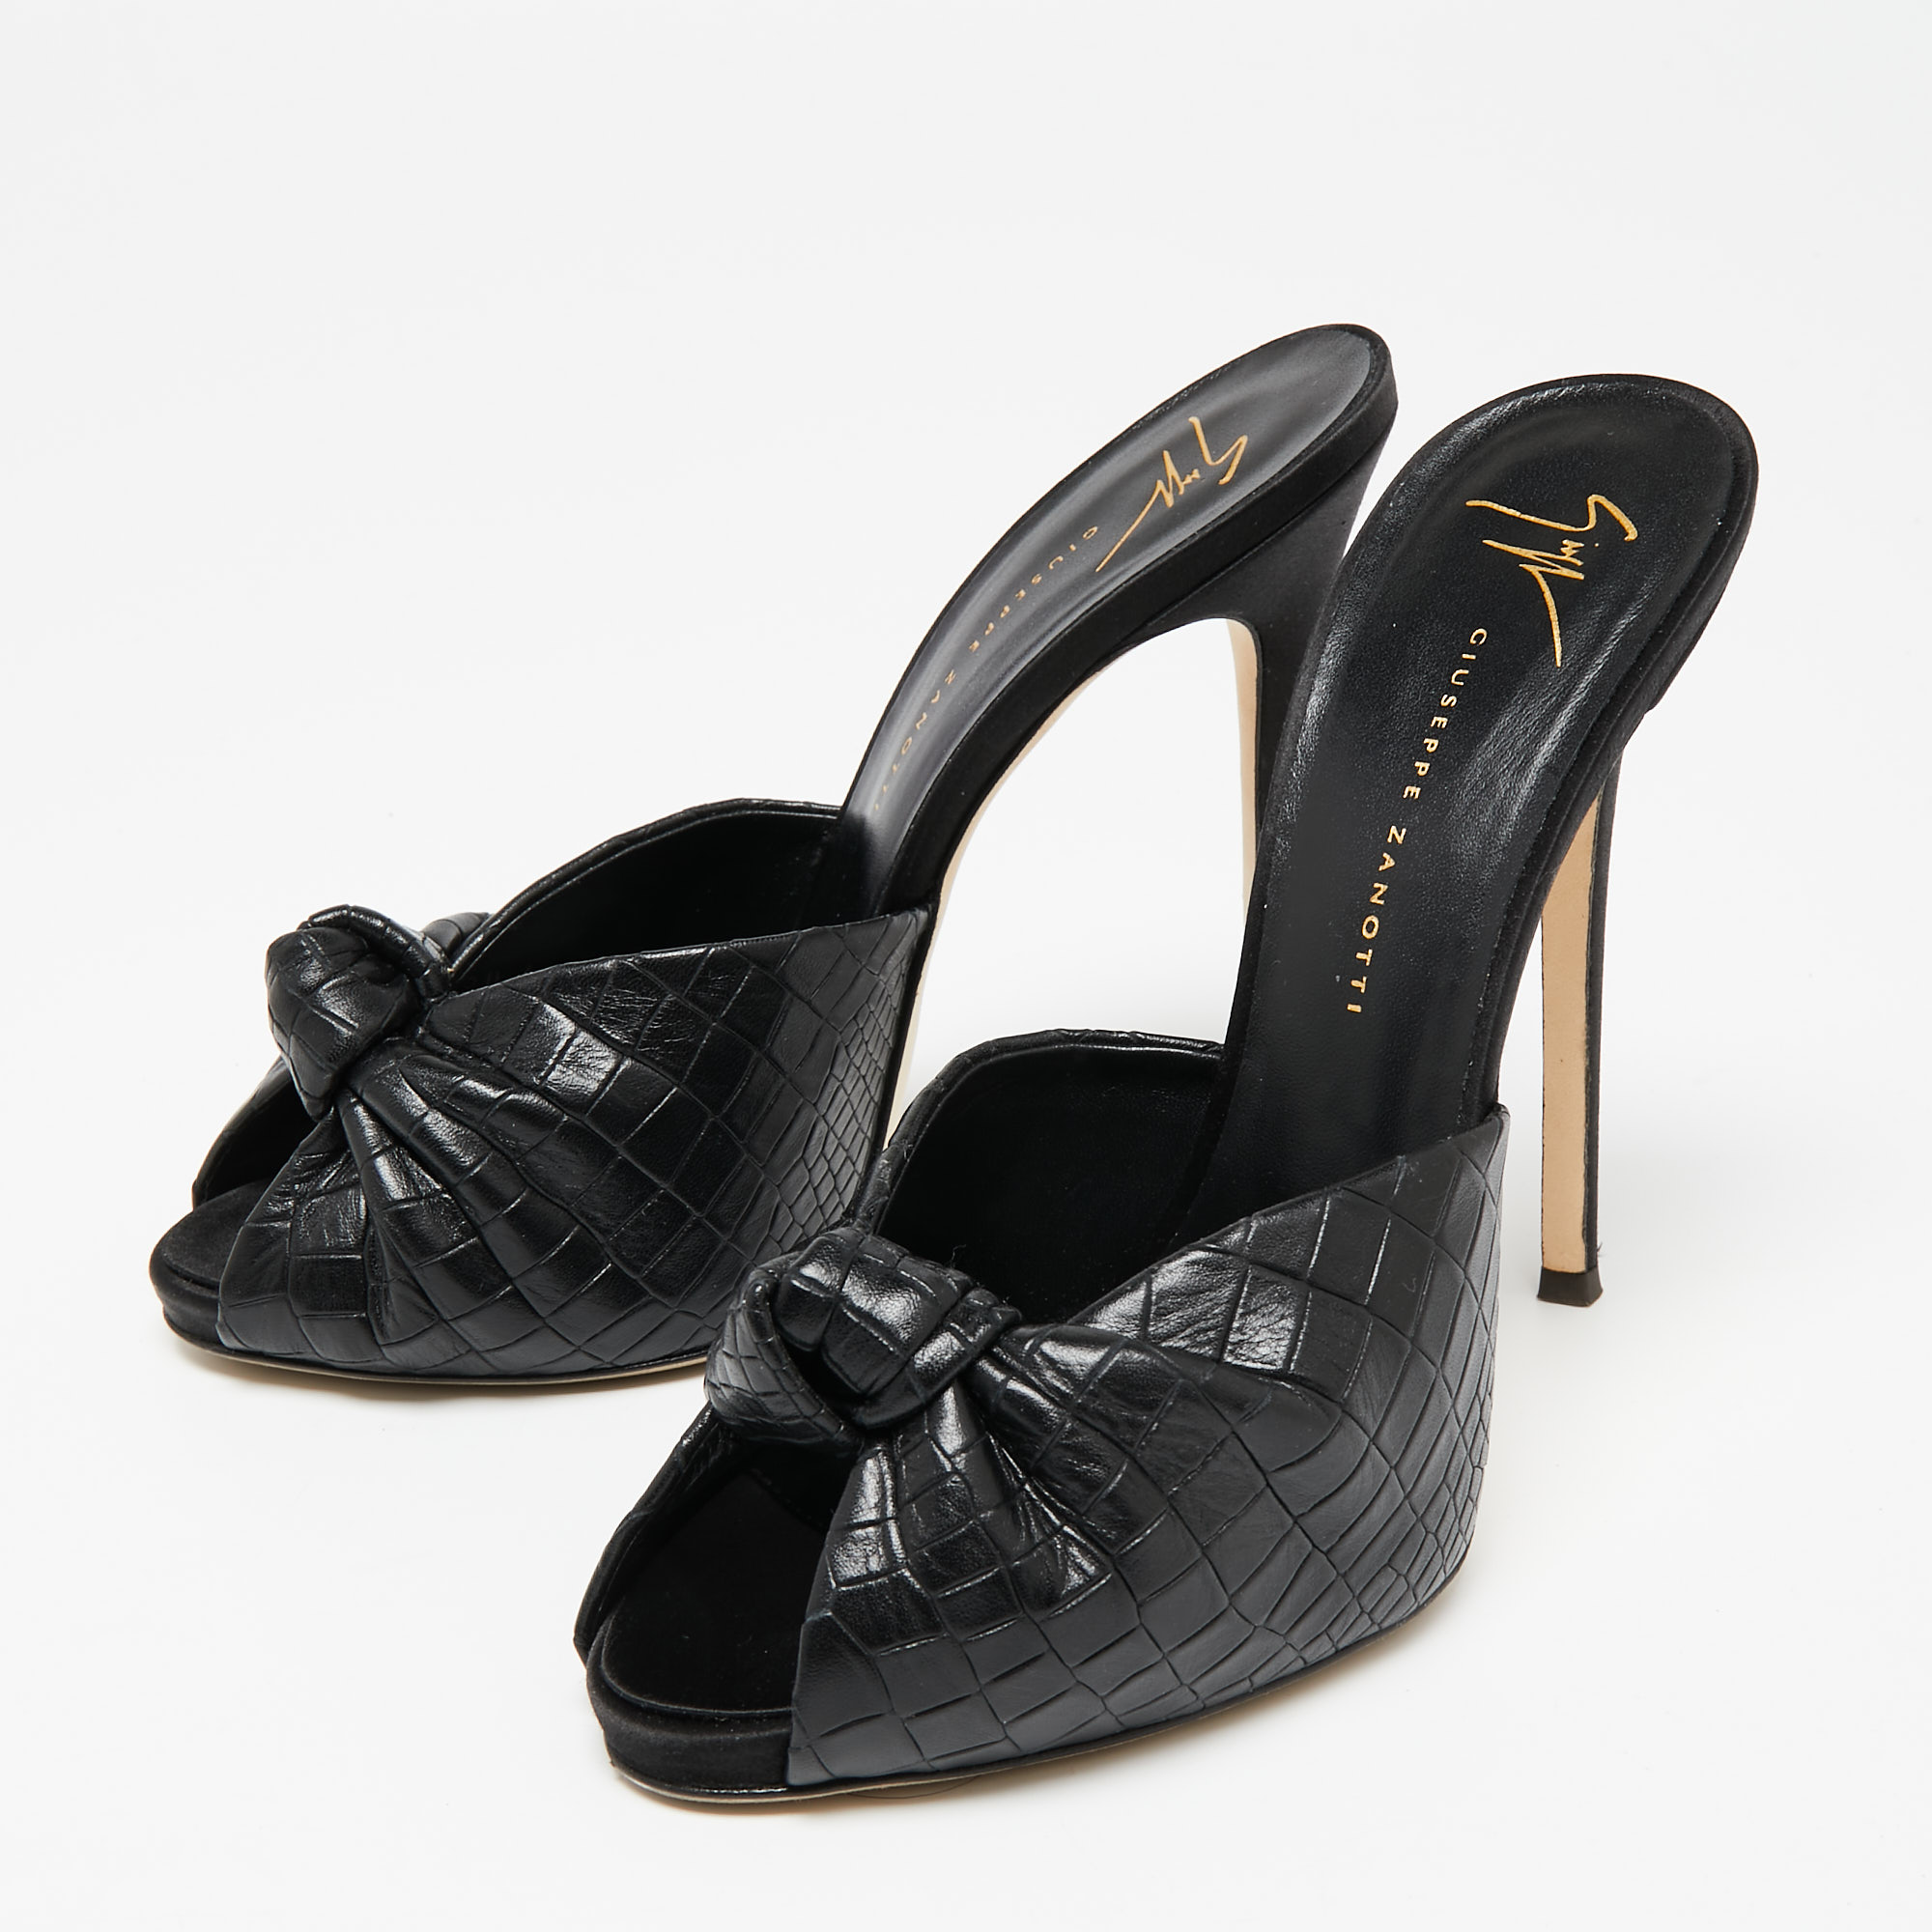 

Giuseppe Zanotti Black Croc Embossed Leather Knotted Slide Sandals Size